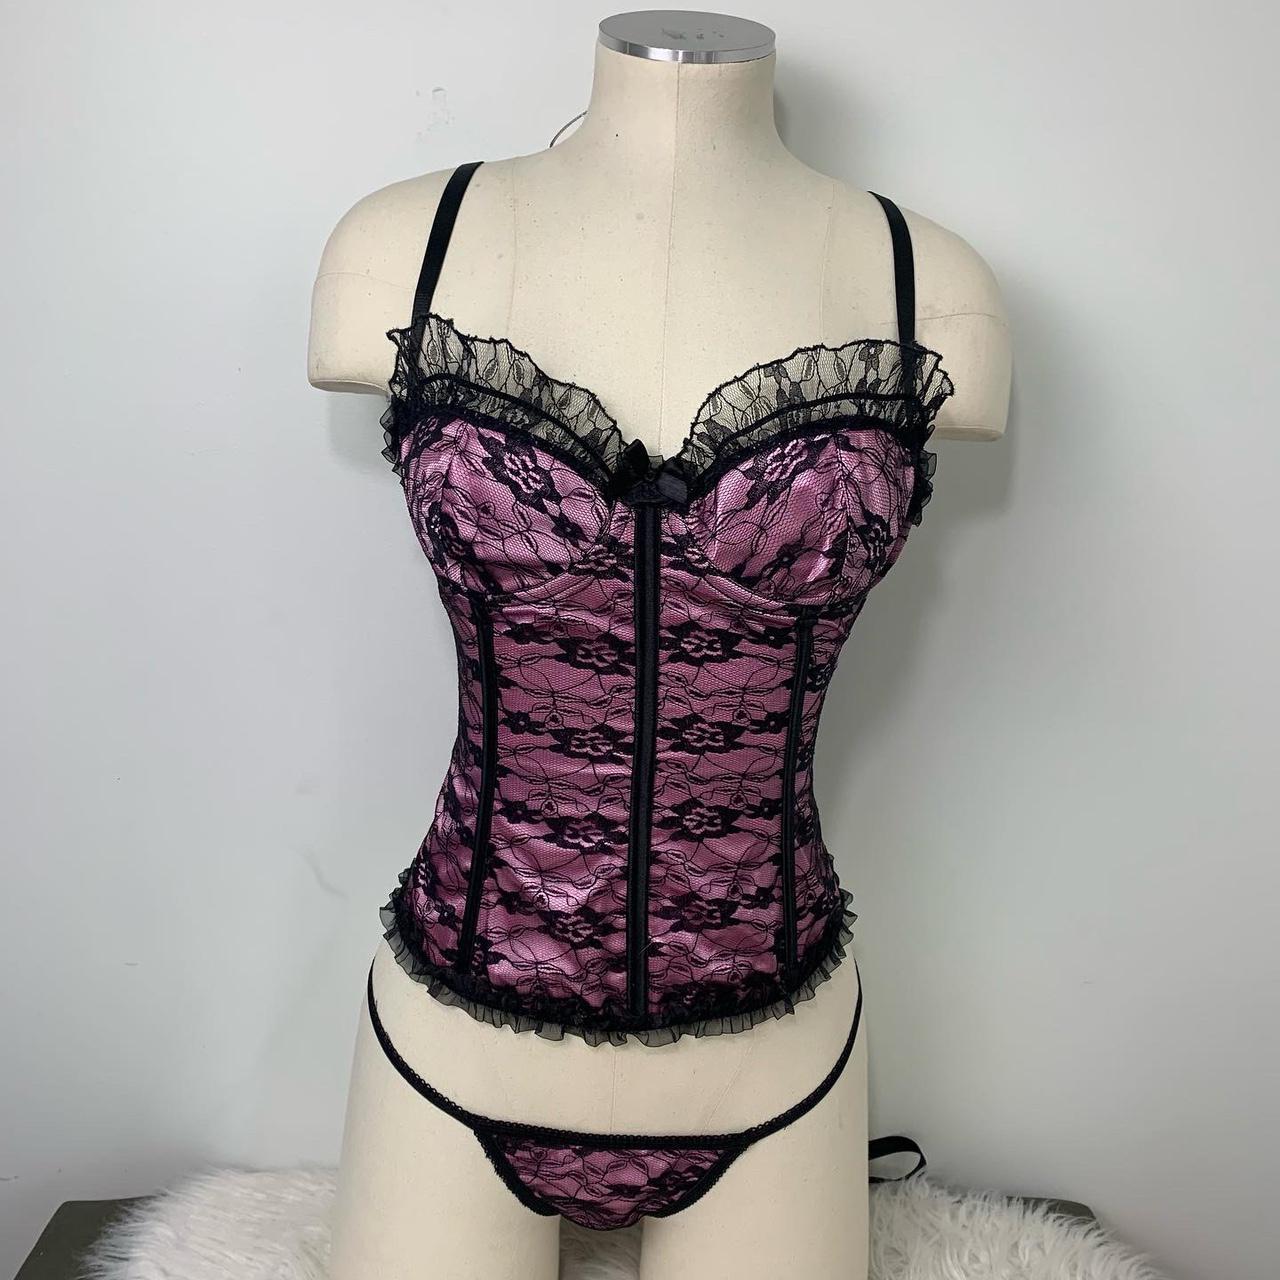 Elegant Moments Women's Pink and Black Bandeaus